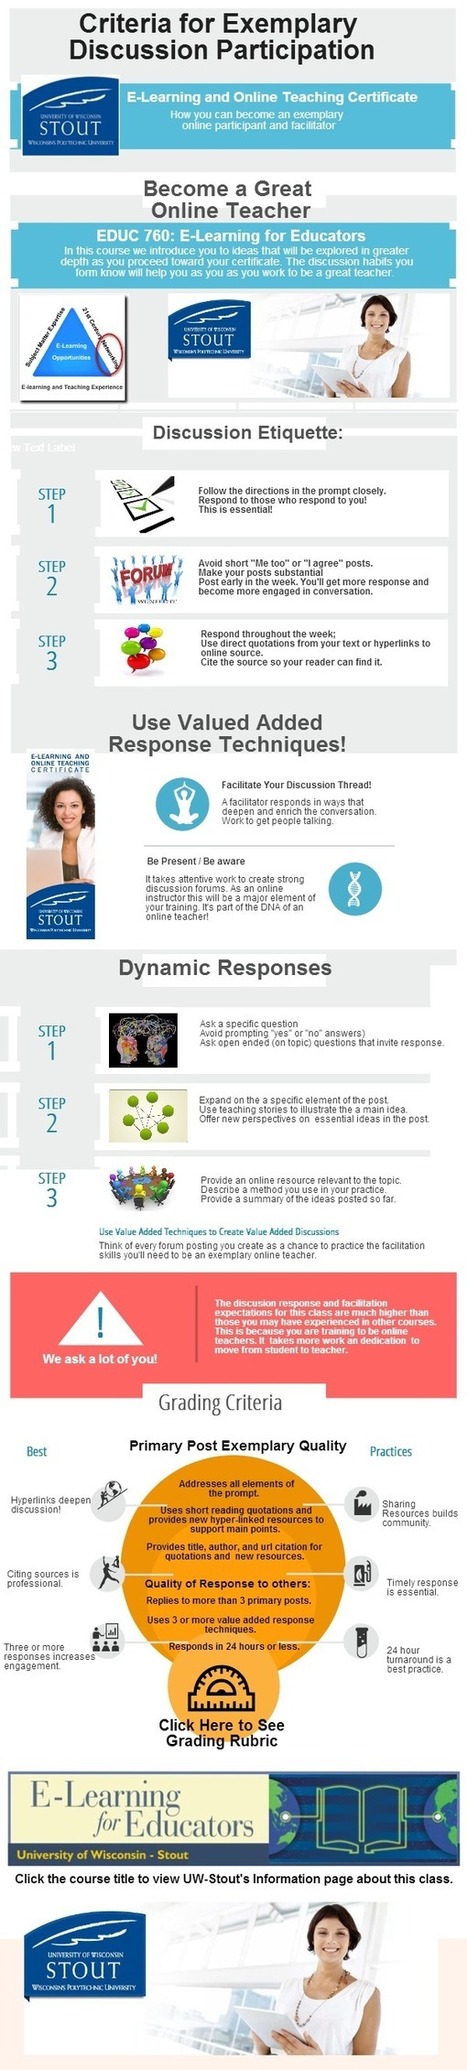 UW-Stout Facilitation and Response Best Practices [Infographic] | 21st Century Learning and Teaching | Scoop.it